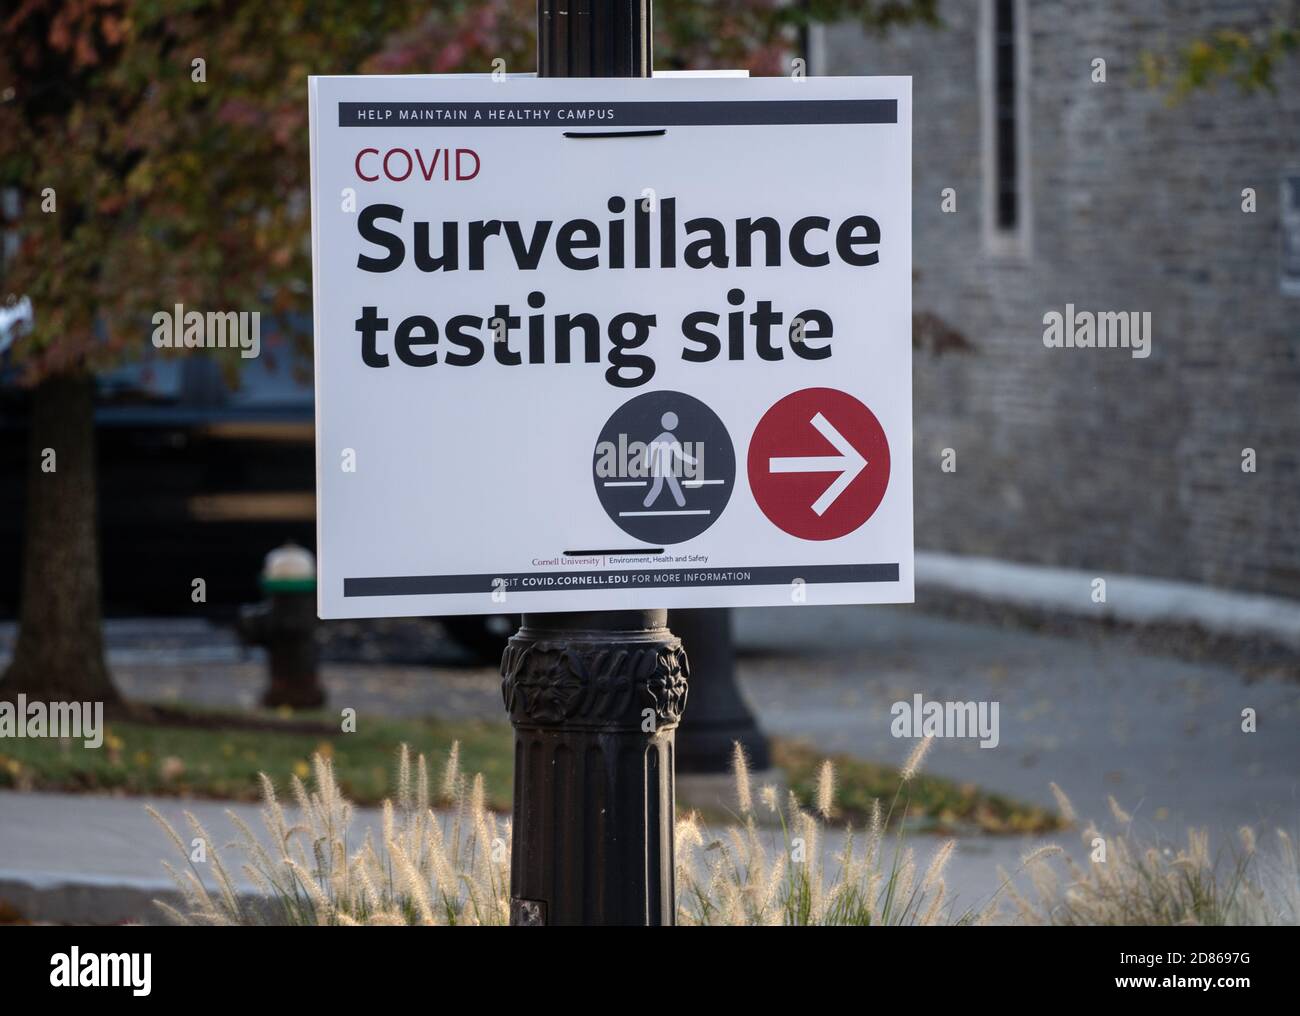 Ithaca, New York, October 18, 2020: Cornell Univeristy COVID-19 testing site Stock Photo